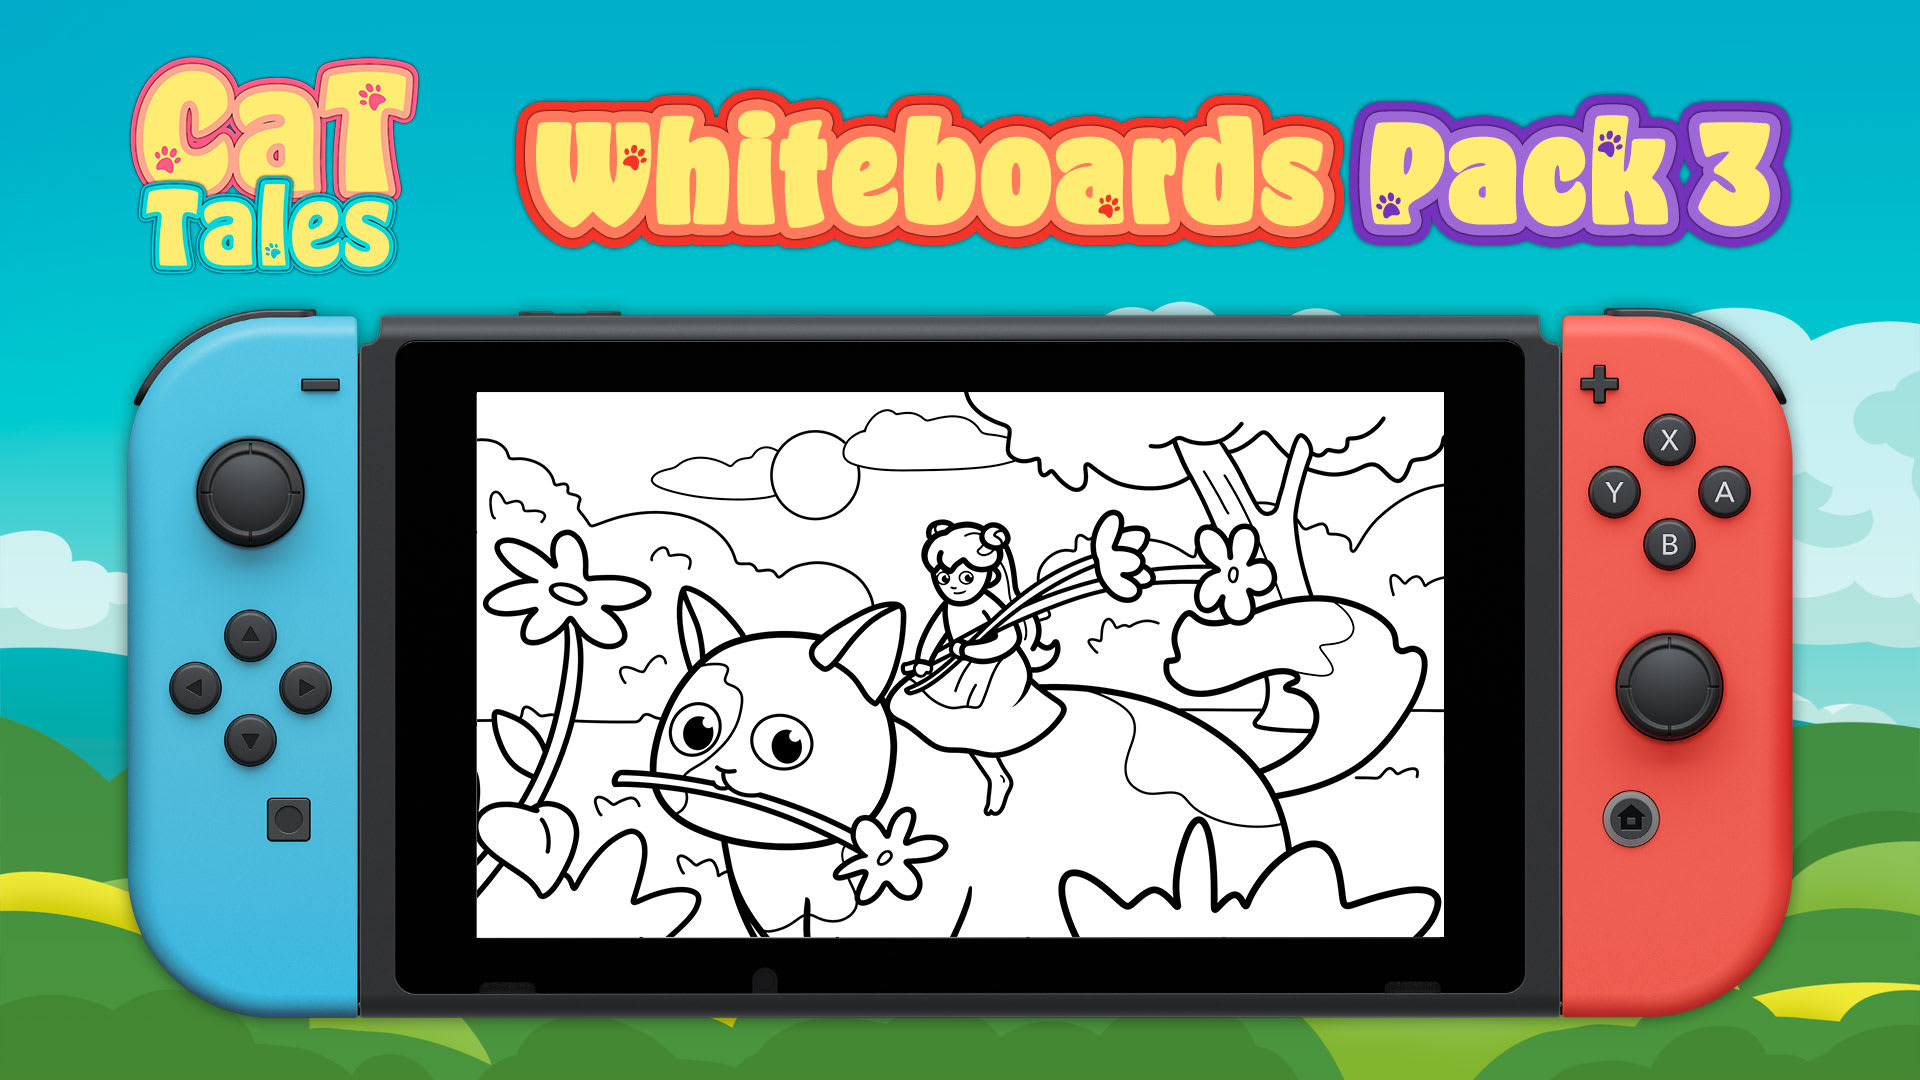 Whiteboards Pack 3